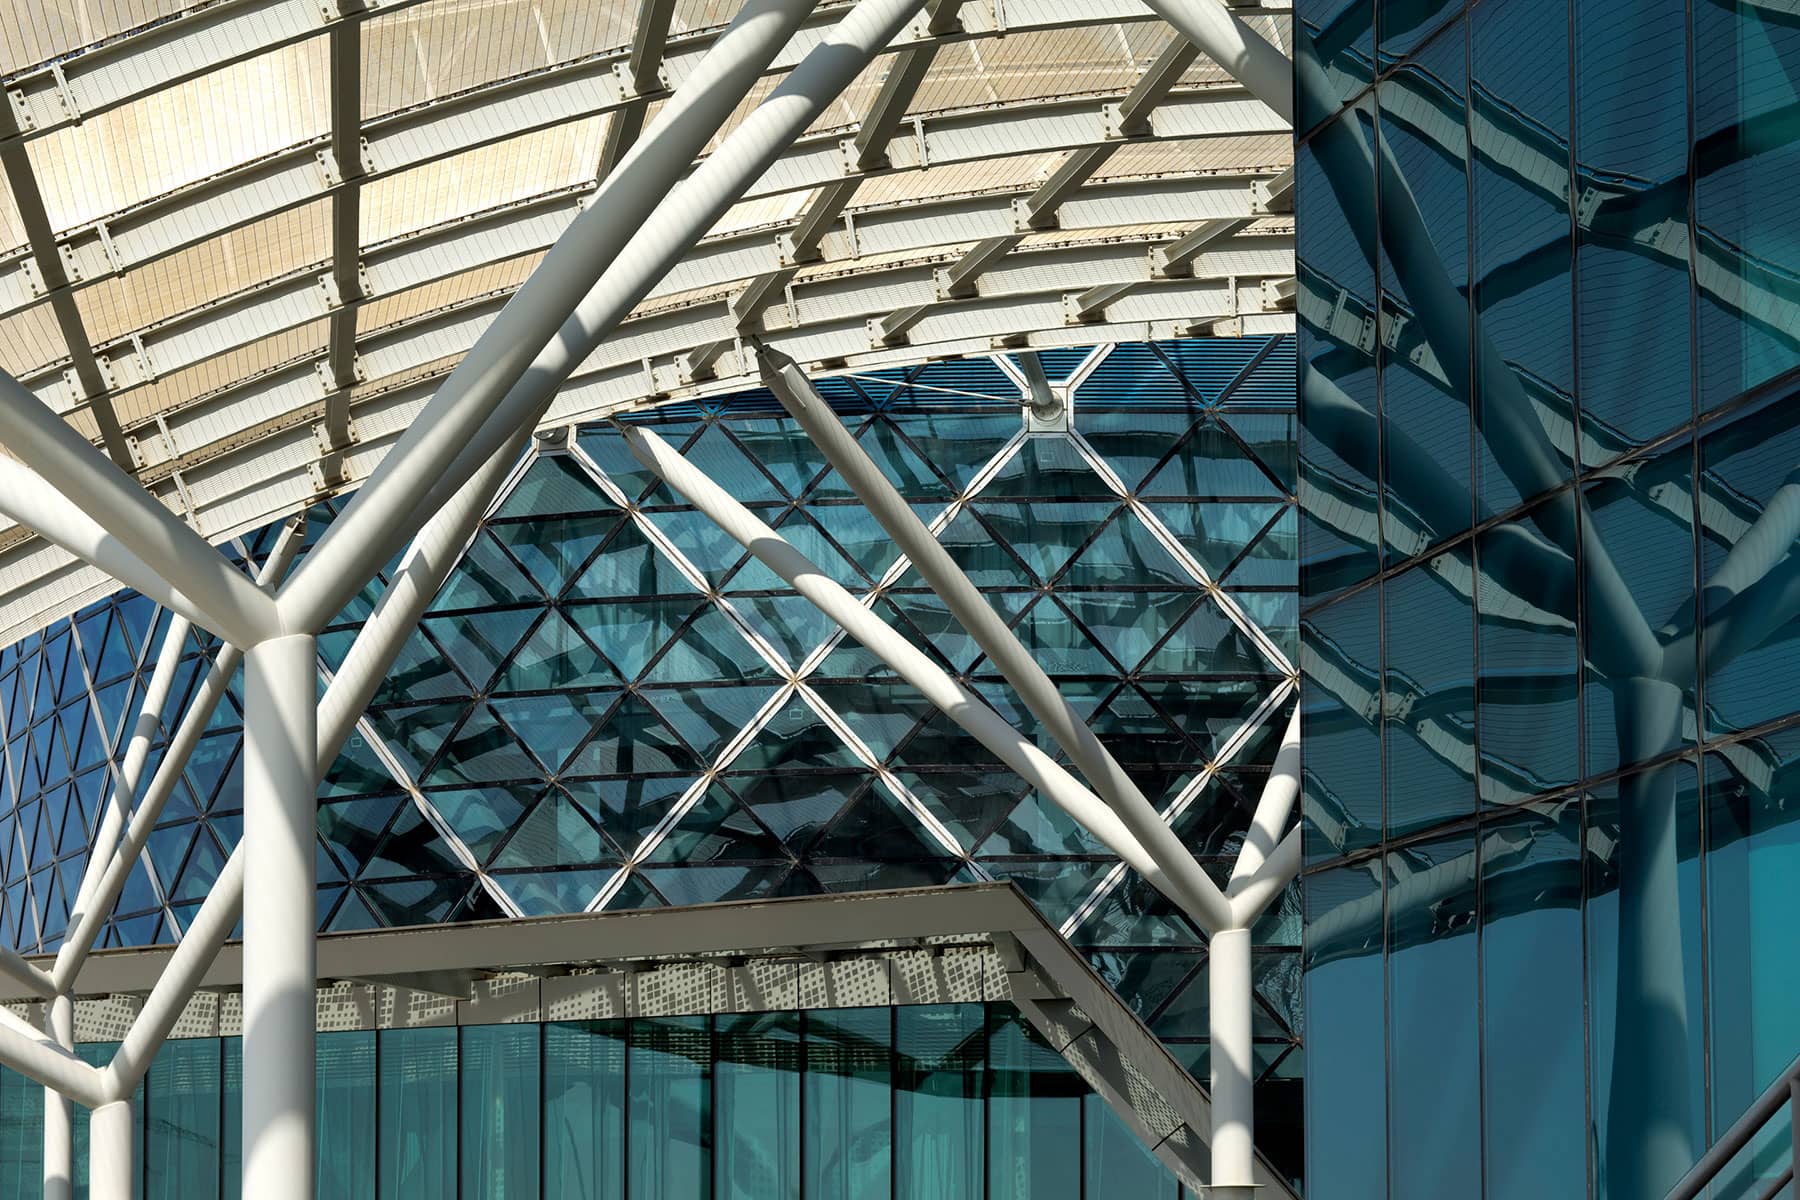 Architecture Photography: Abstract Perspective of canopy shading at Capital Gate Building, Abu Dhabi.